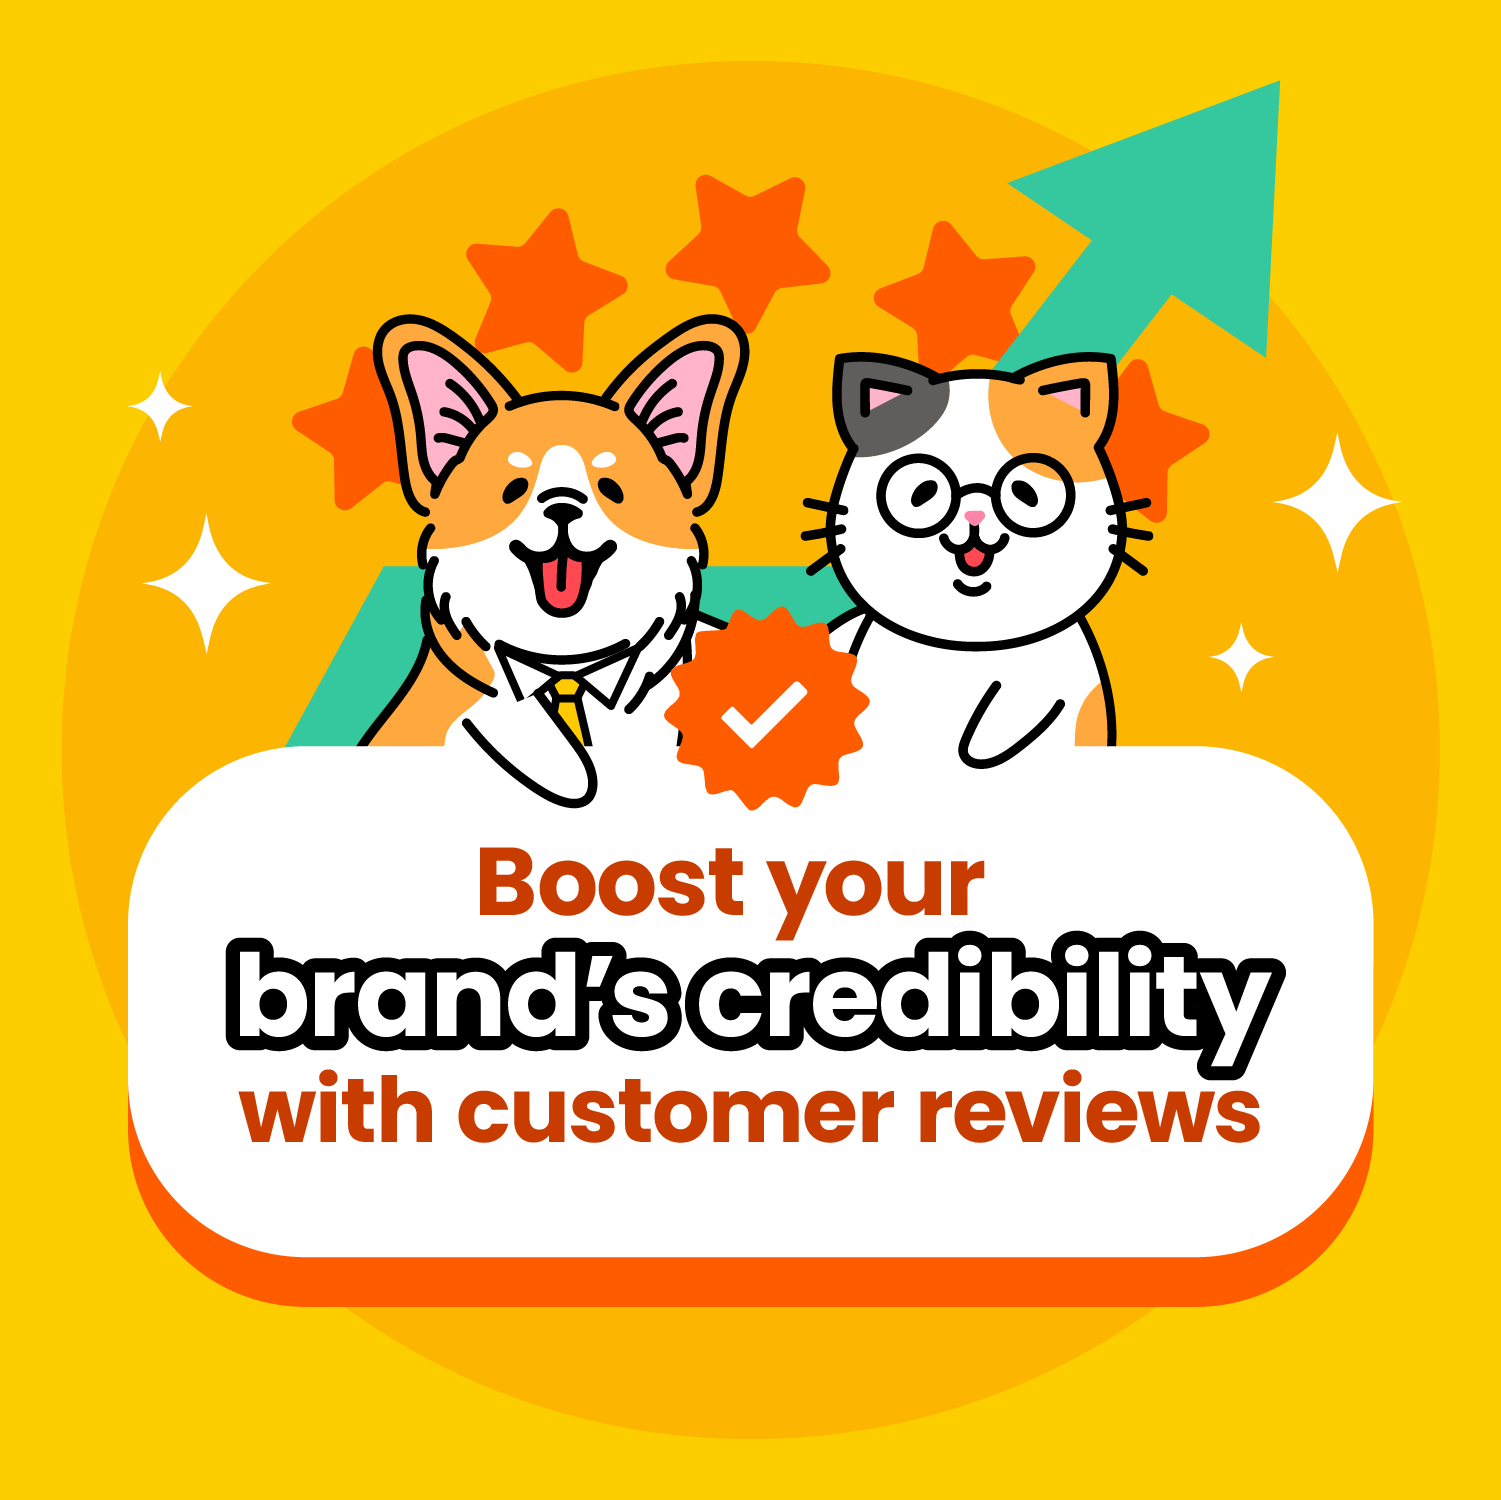 How customer reviews can help your brand